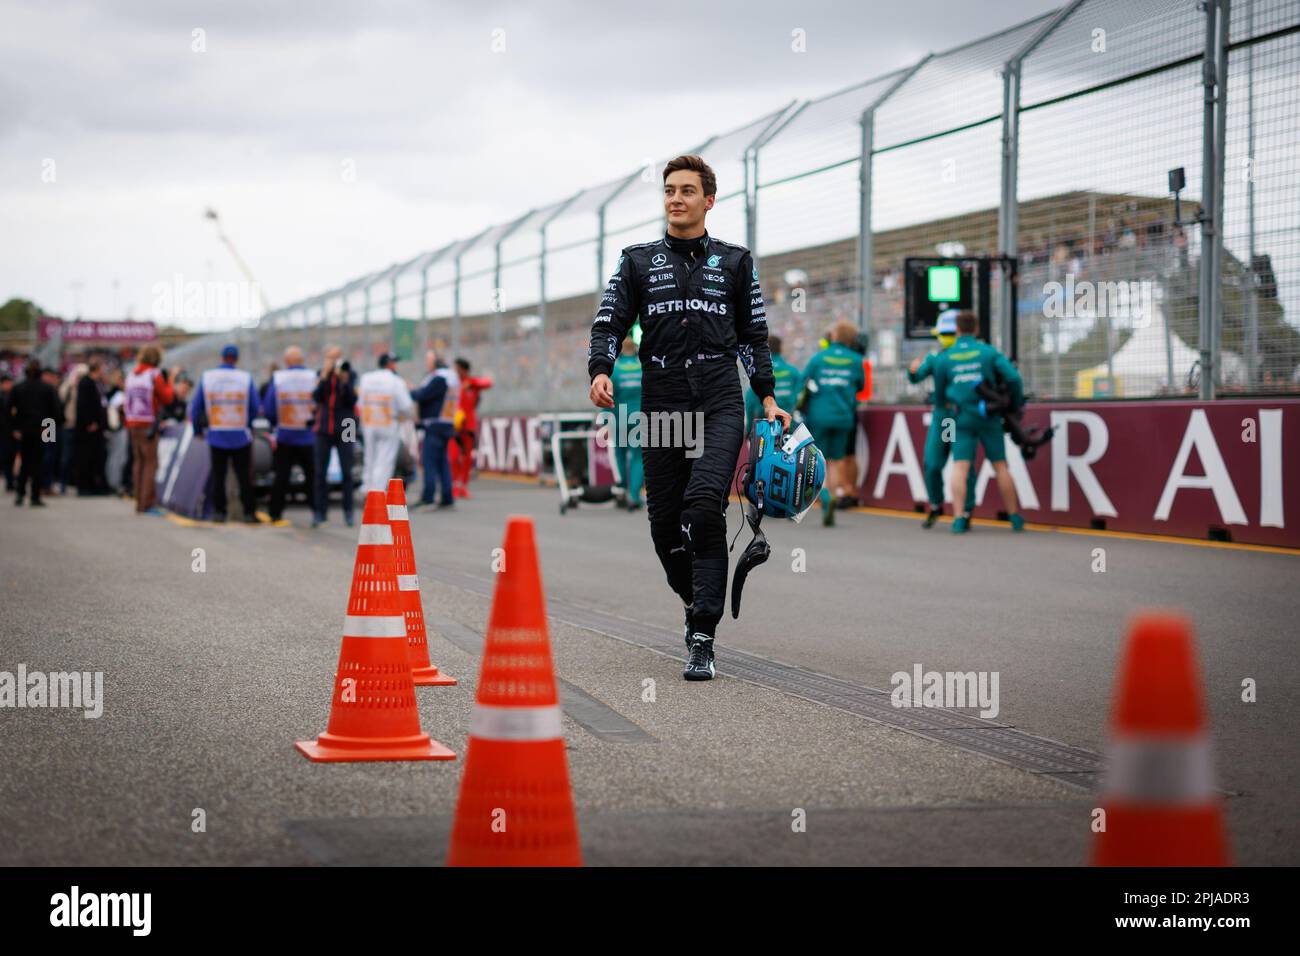 Albert Park, 1 April 2023 George Russell (GBR) of team Mercedes after the qualifying session. corleve/Alamy Live News Stock Photo